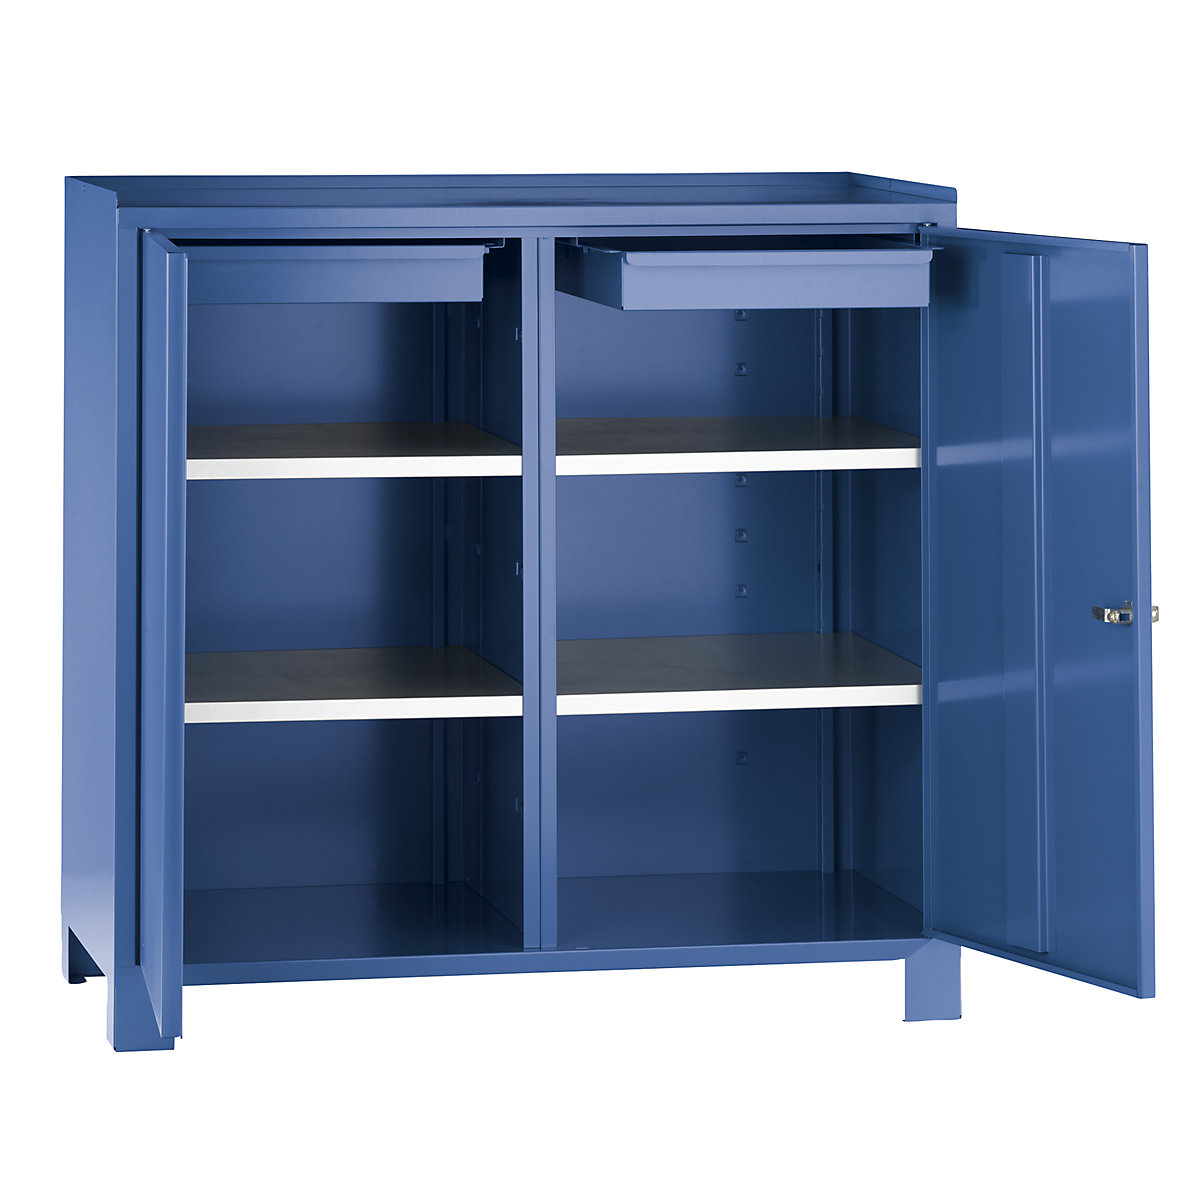 Tool cupboard with feet – Wolf, HxWxD 1000 x 1000 x 500 mm, partition, 1 drawer and 2 shelves on each side, brilliant blue RAL 5007-11